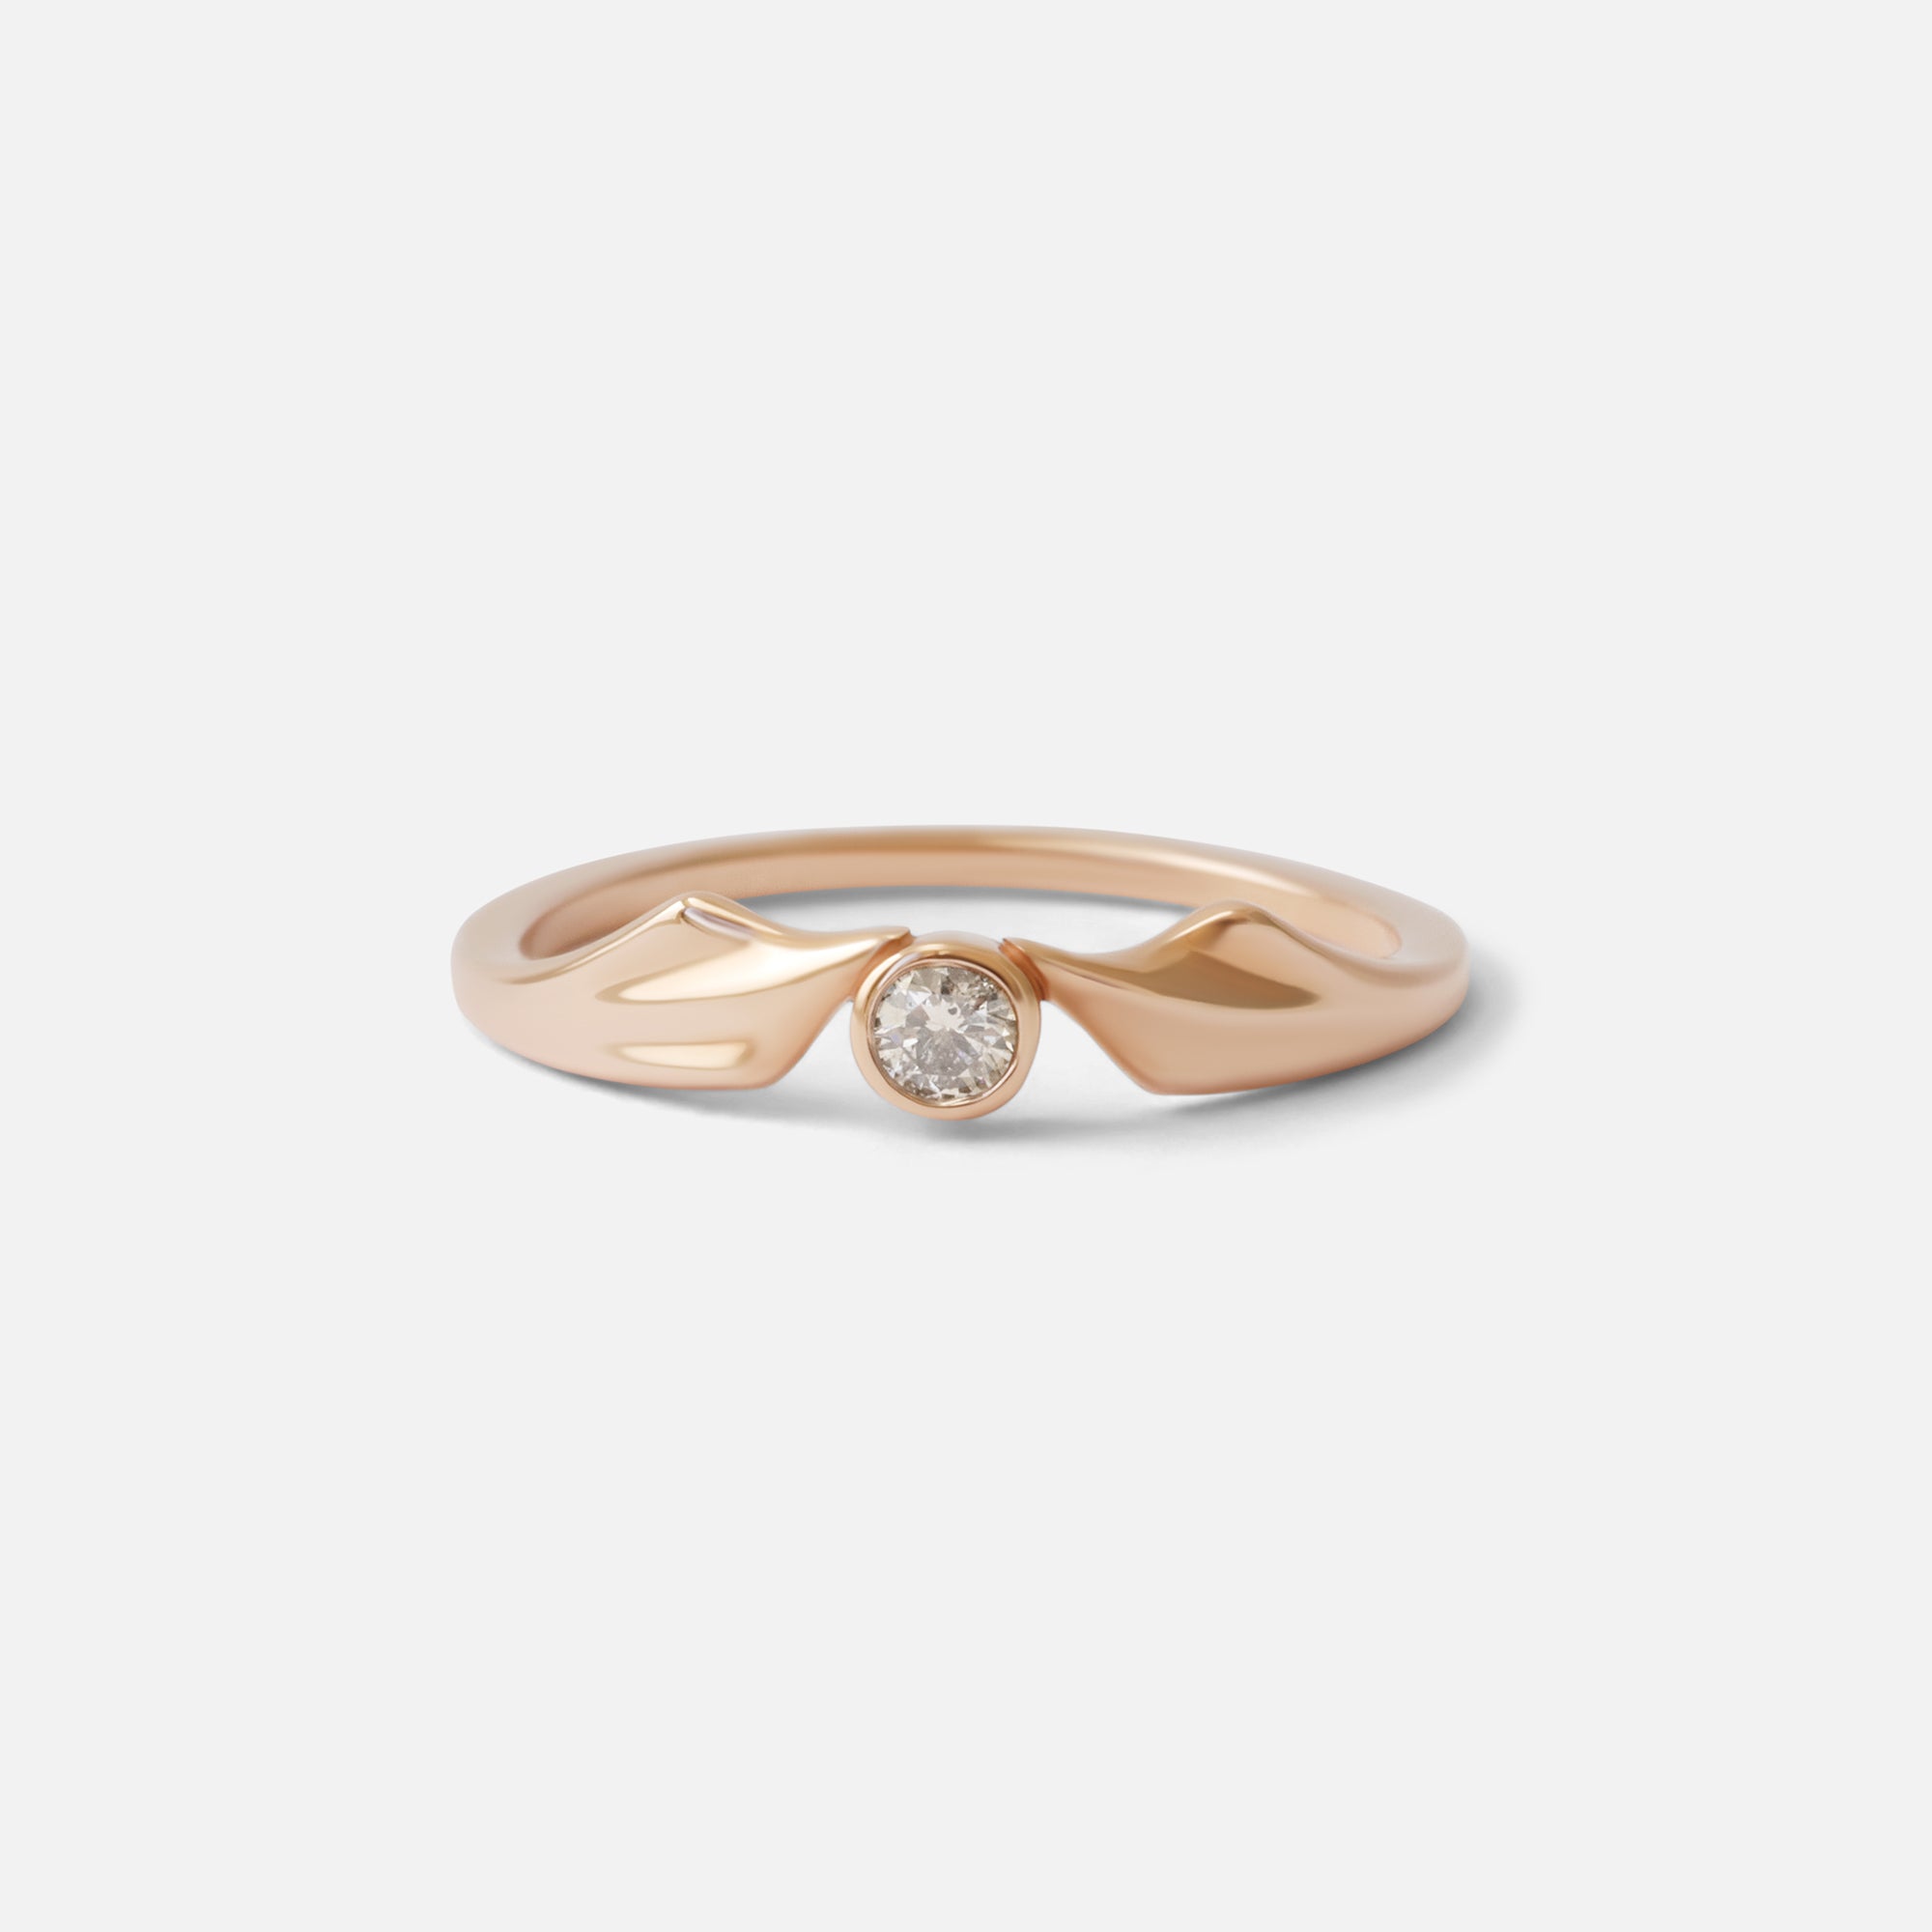 Mirror Ring 1 / Diamond By O Channell Designs